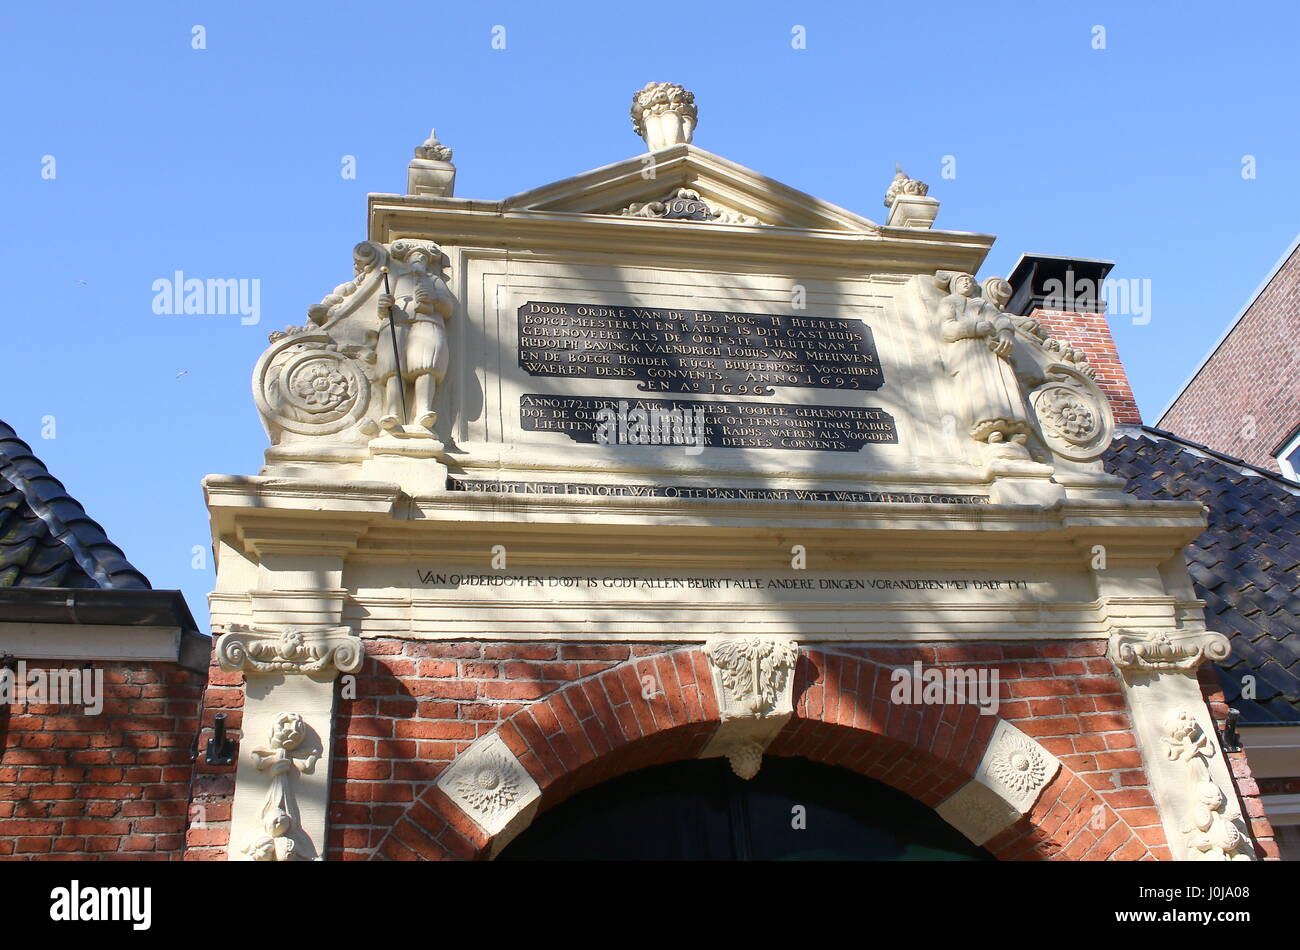 Gable stone, entrance Sint Anthonygasthuis (Saint Antony's Hofje = courtyard with Almshouses), inner city of Groningen, Netherlands. Founded in 1517. Stock Photo